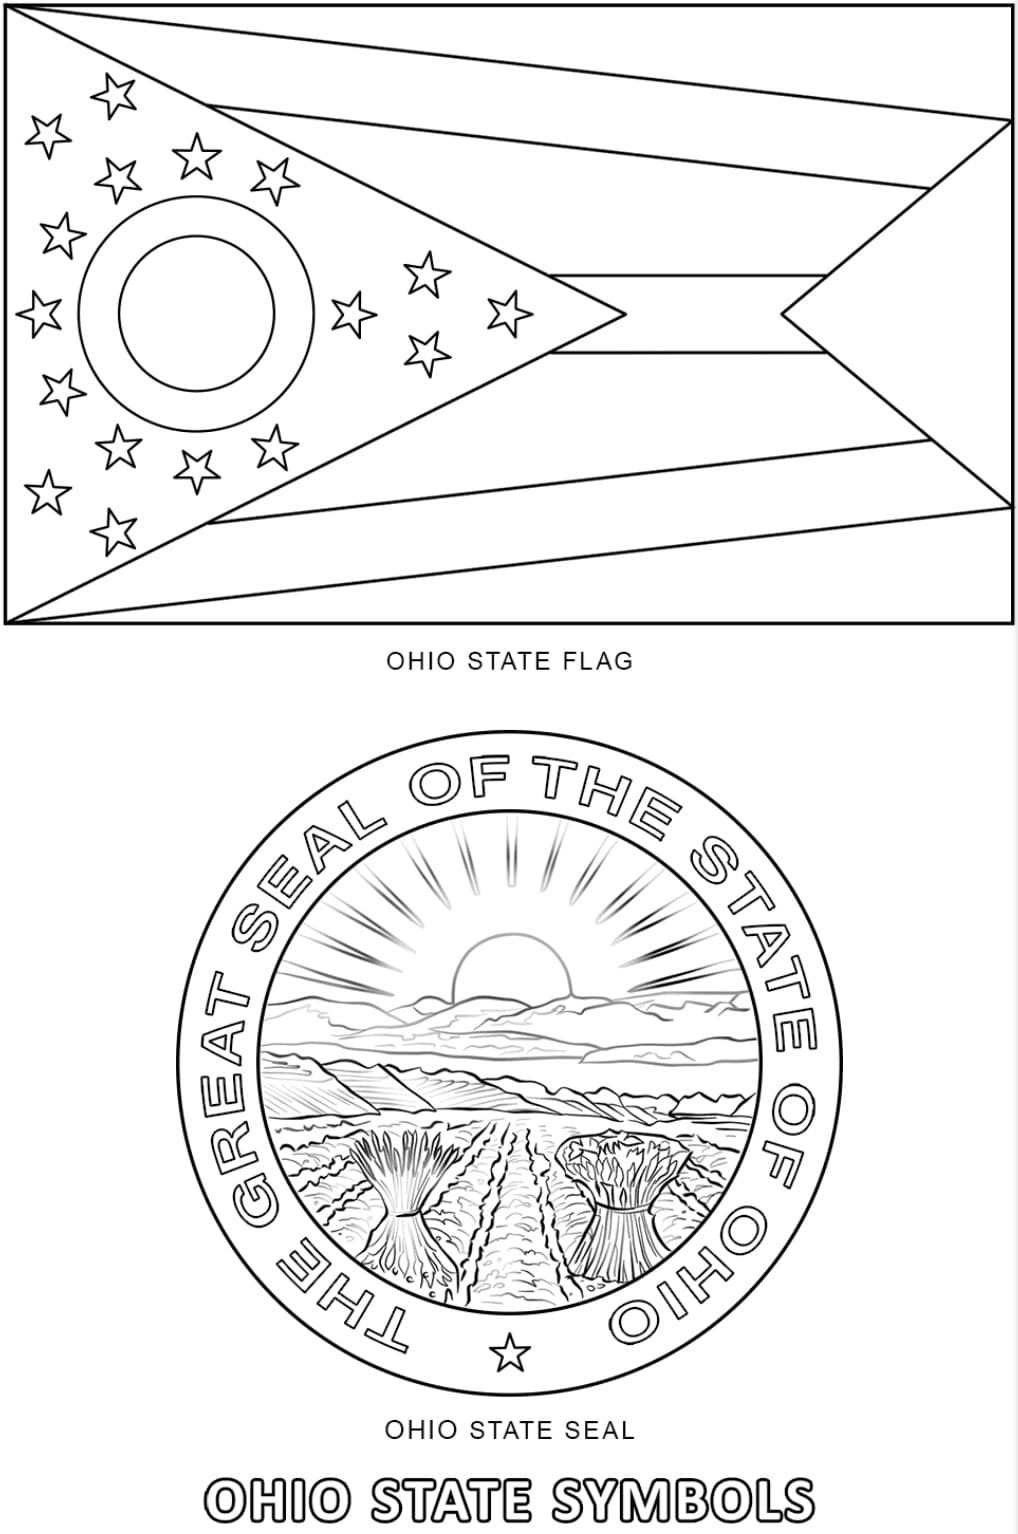 Ohio State Symbols coloring page - Download, Print or Color Online for Free